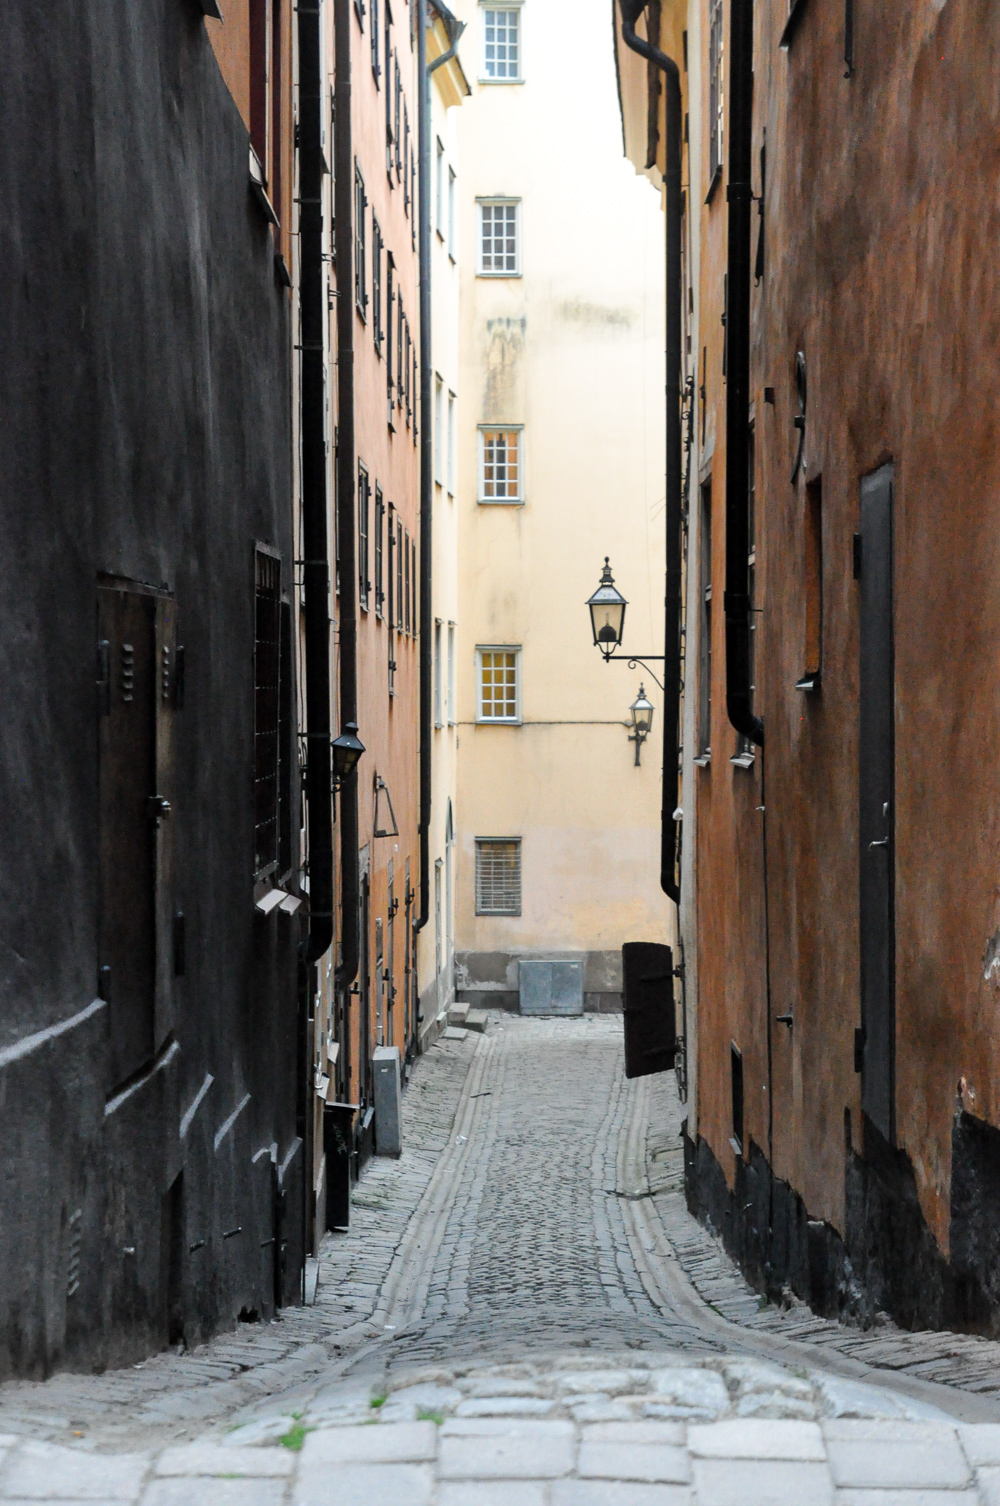  Alley ways of Gamla Stan, Stockholm's old town.